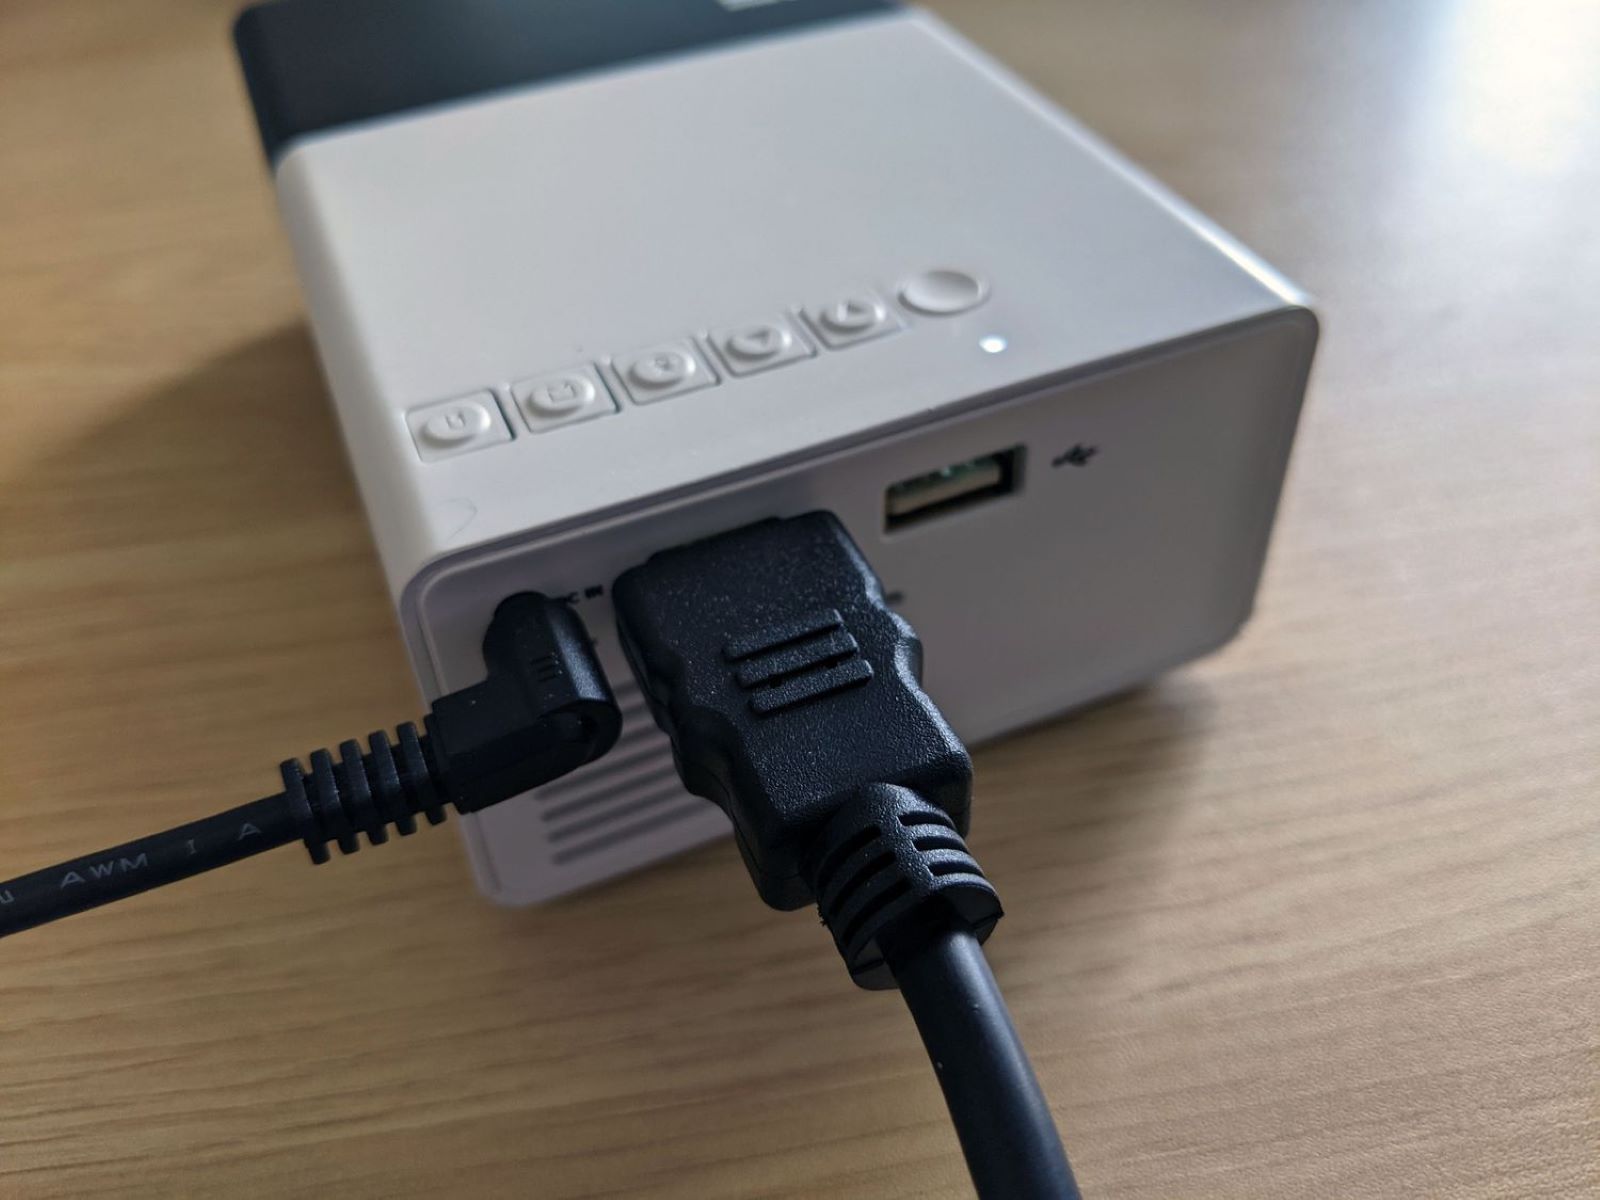 Mini Projector Connection To Phone: Step-by-Step Guide